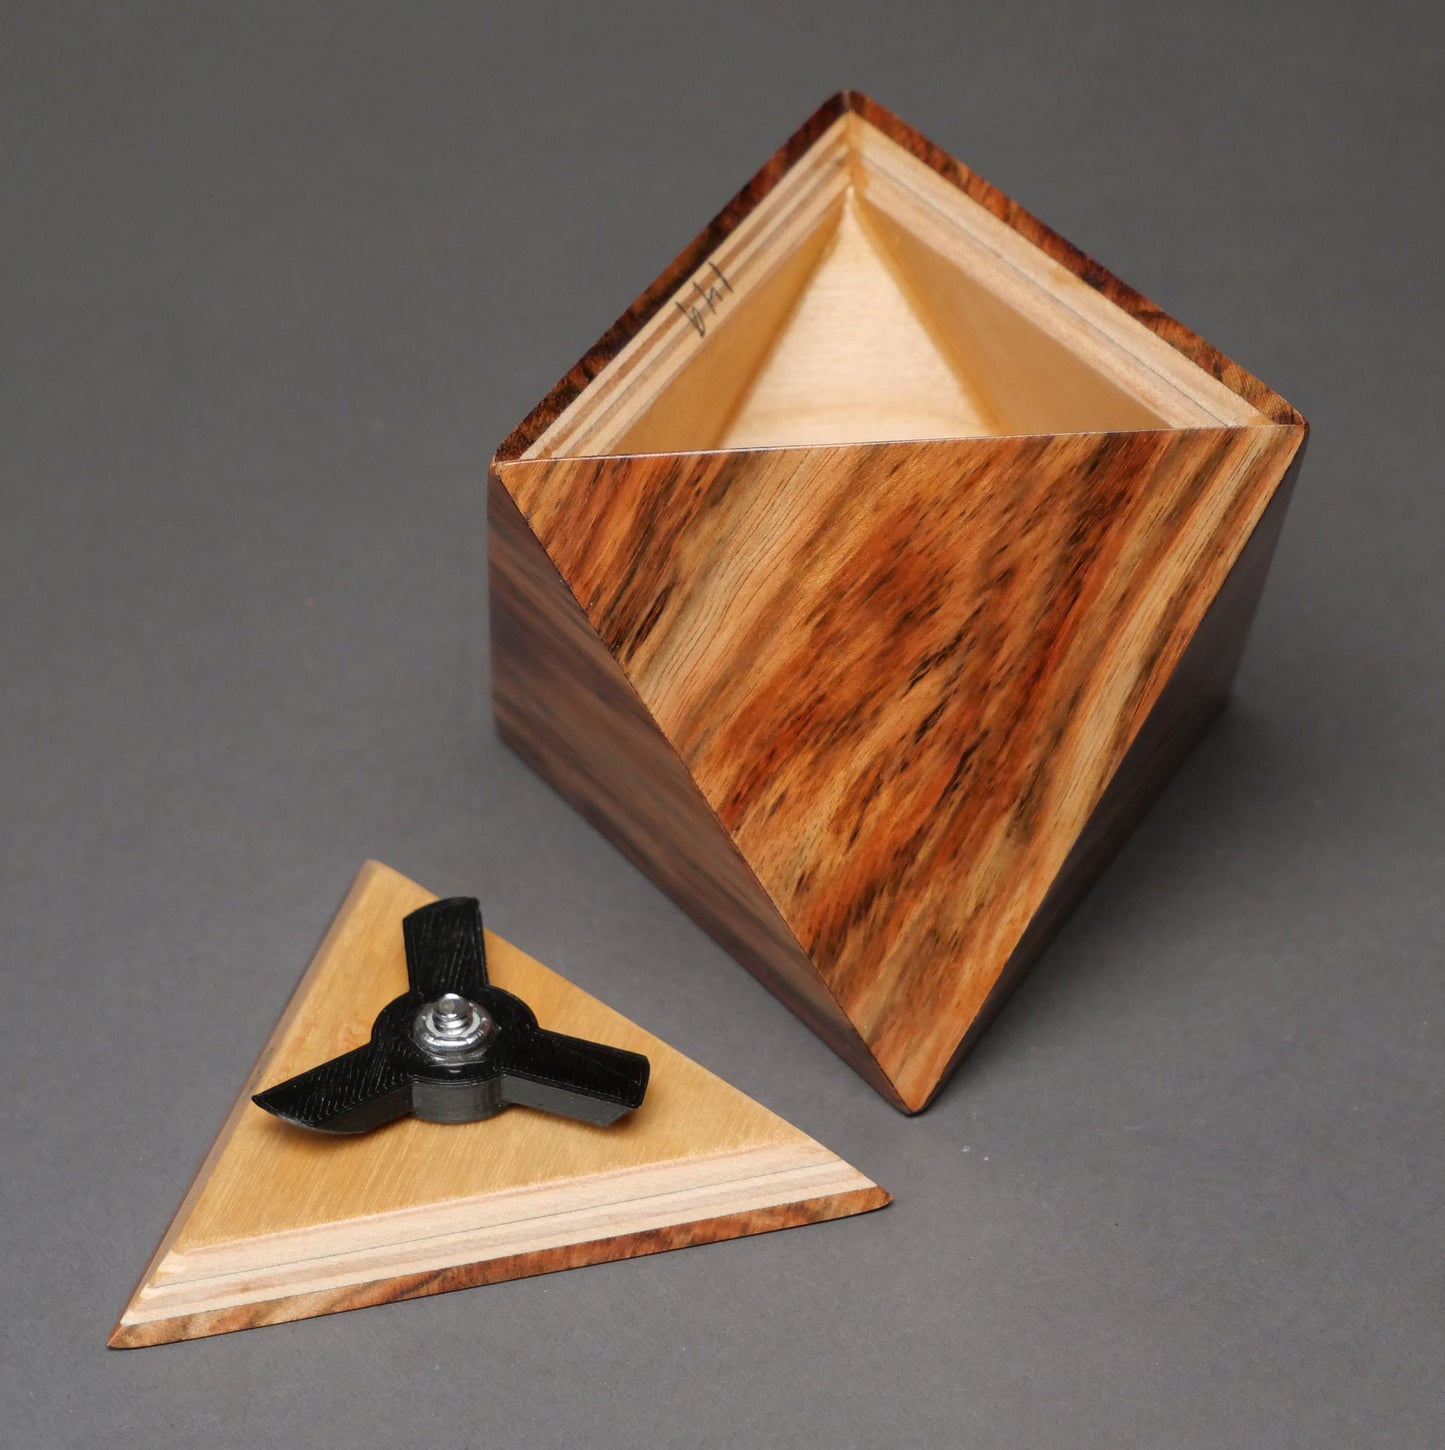 Small Geometric Cremation Urn for an Infant or Small Pet Ashes, 10 cu-in